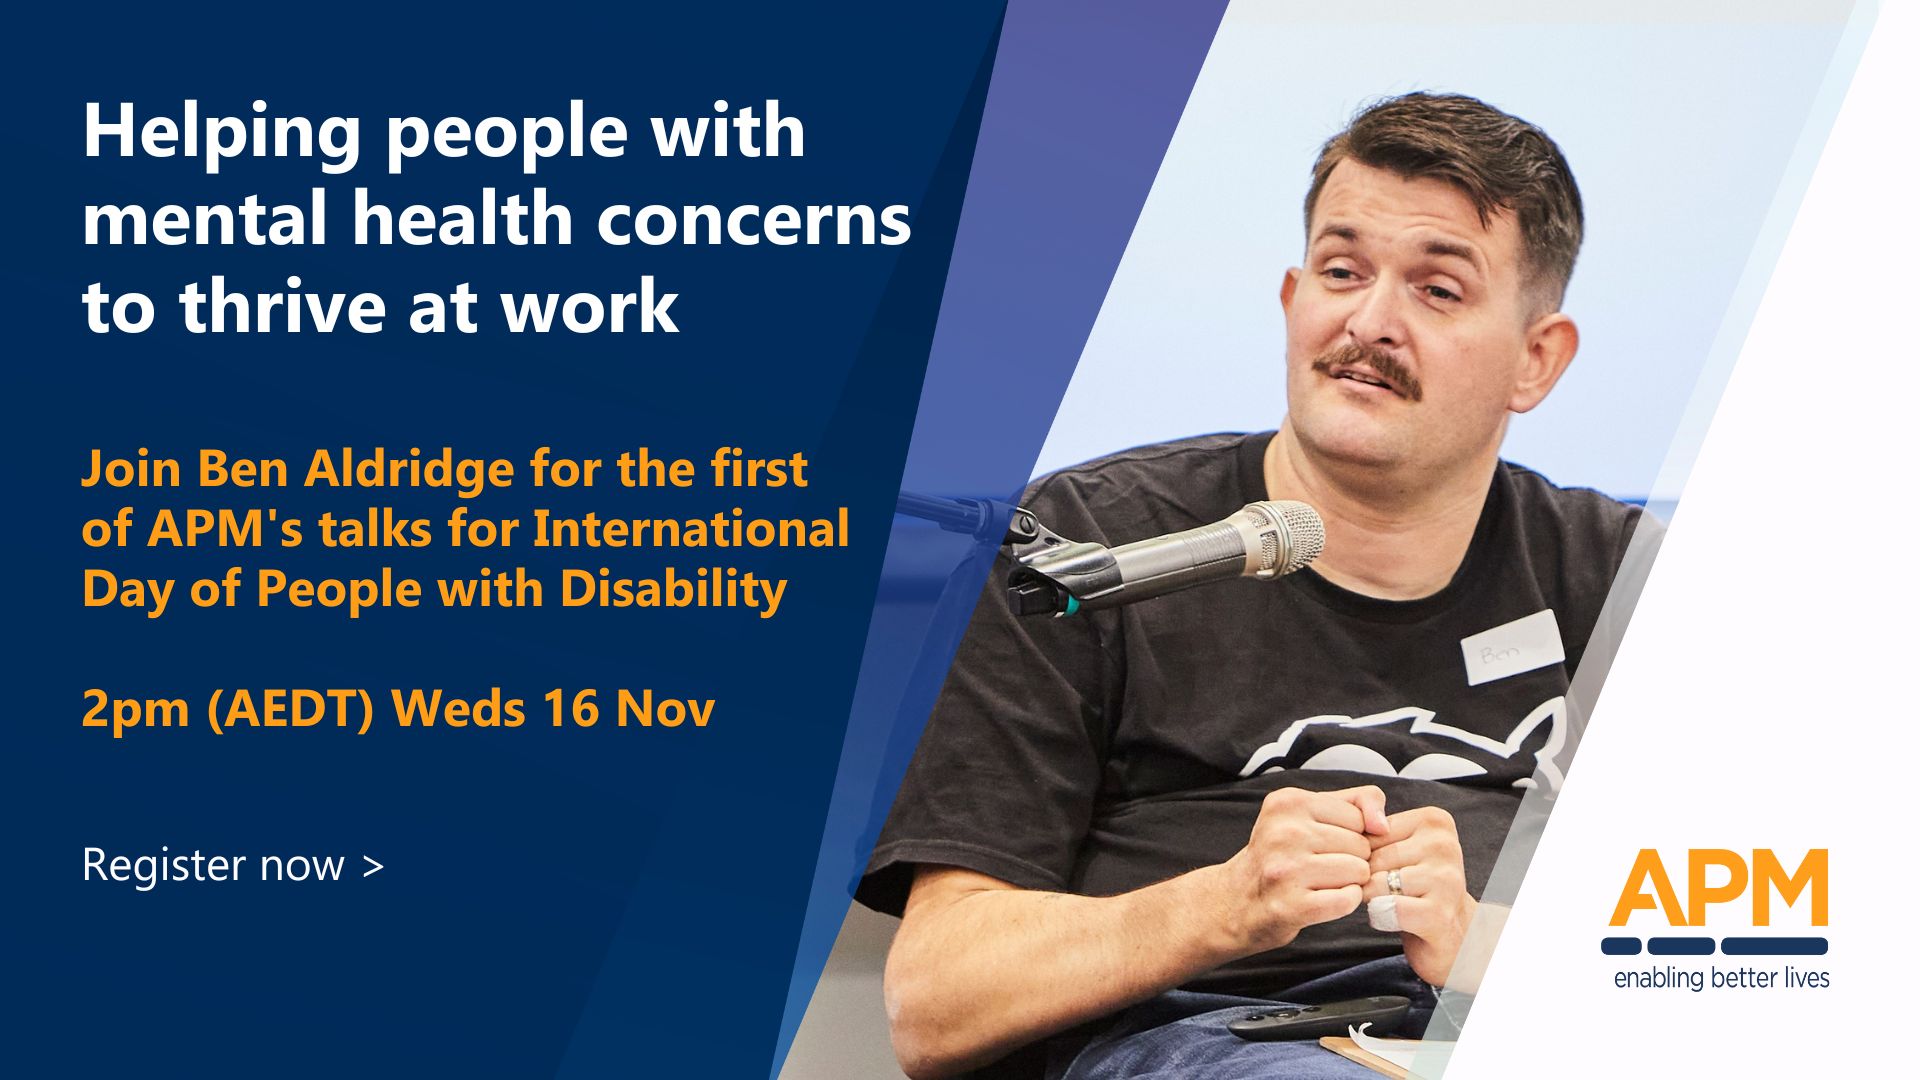 Register to join Ben's talk for International Day of People with Disability